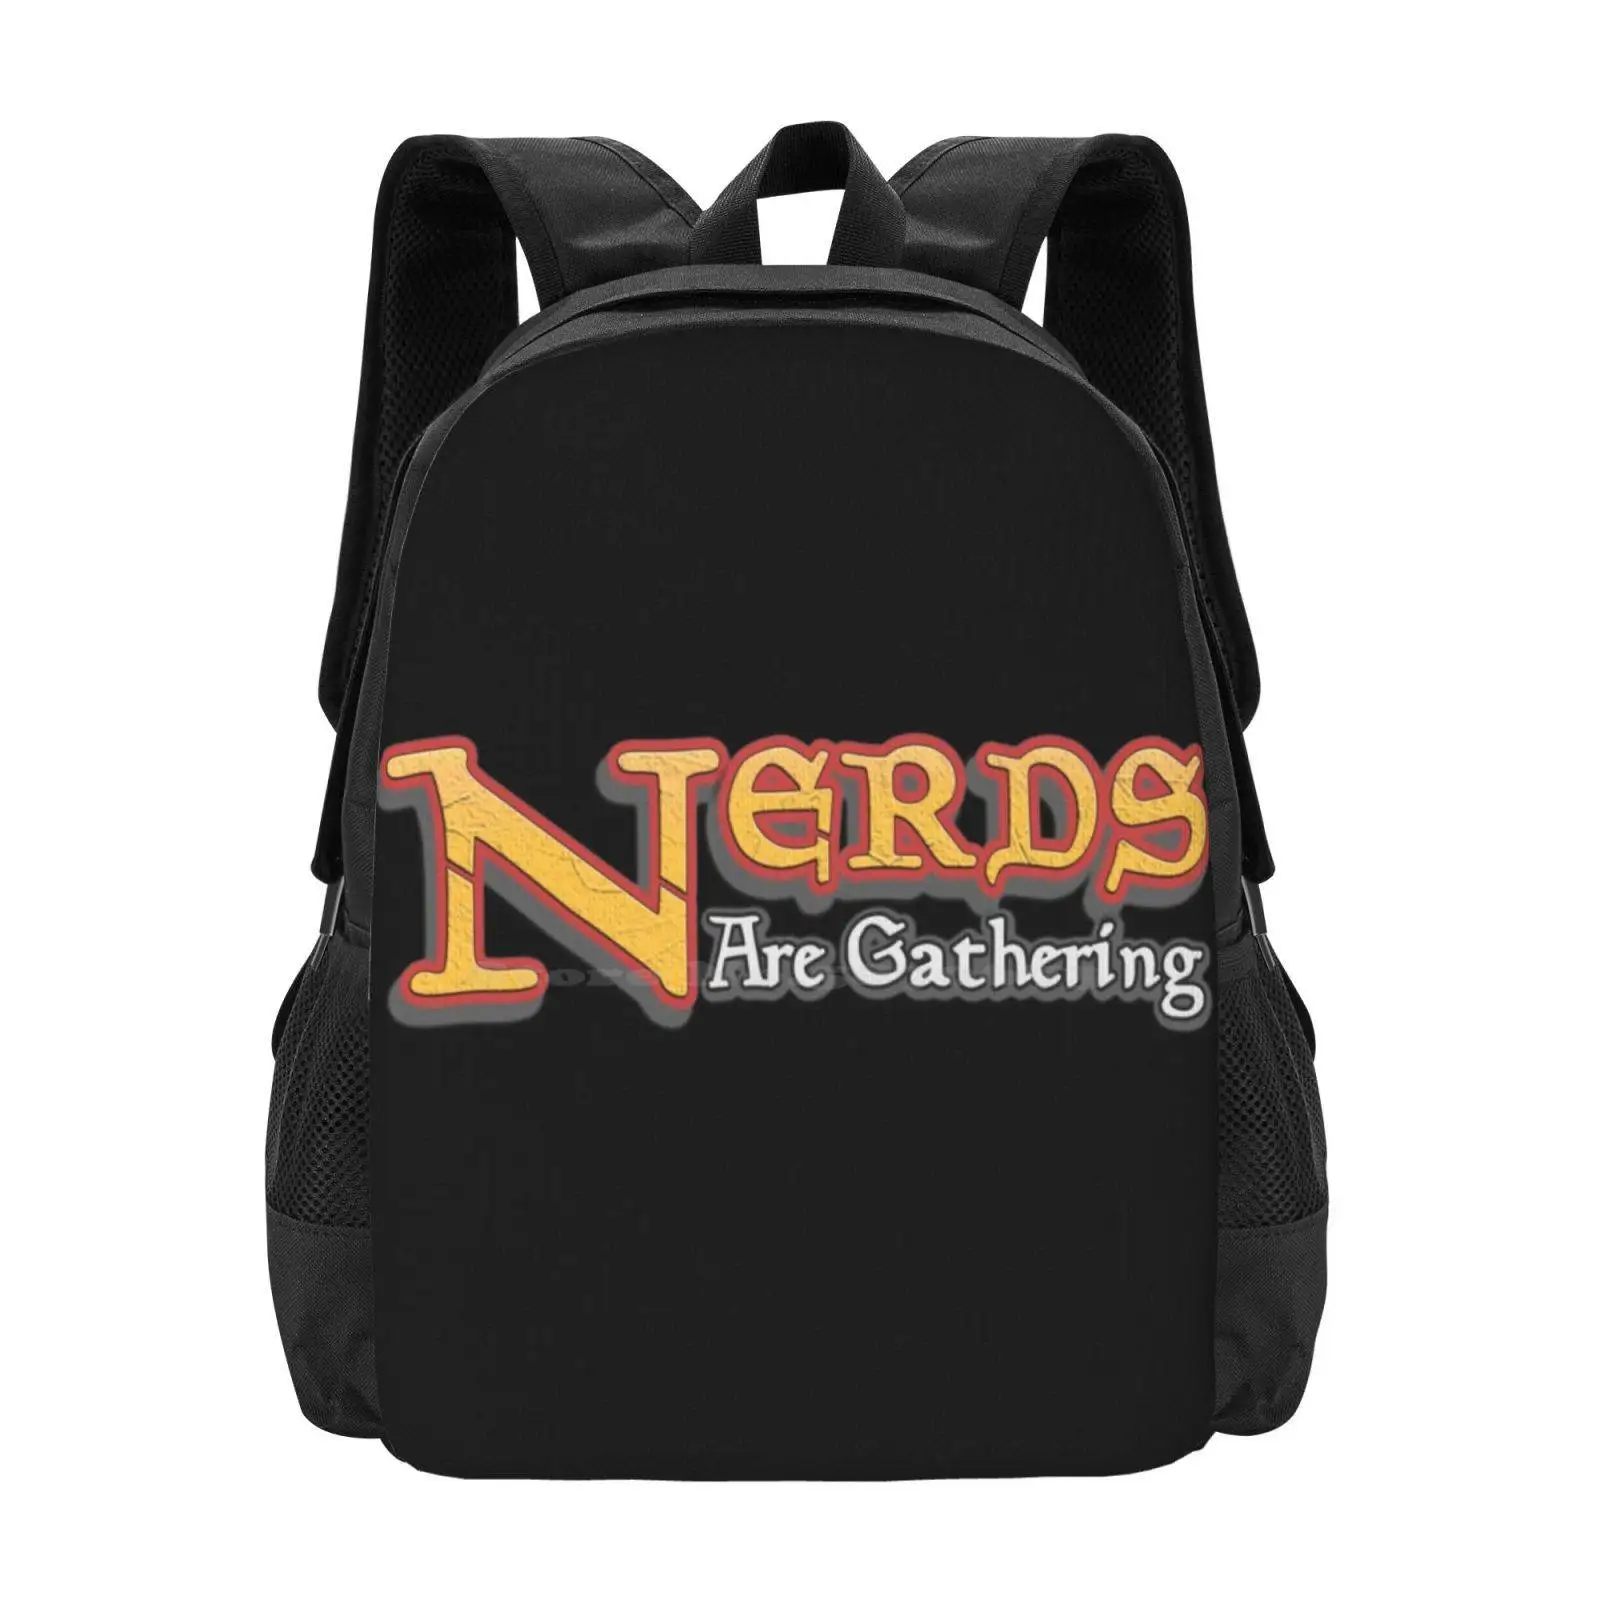 

Nerds Are Gathering-Spoof Hot Sale Backpack Fashion Bags Jace Game Collectibles Spoof Pop Culture Dork Nerd Geek Cool Comics